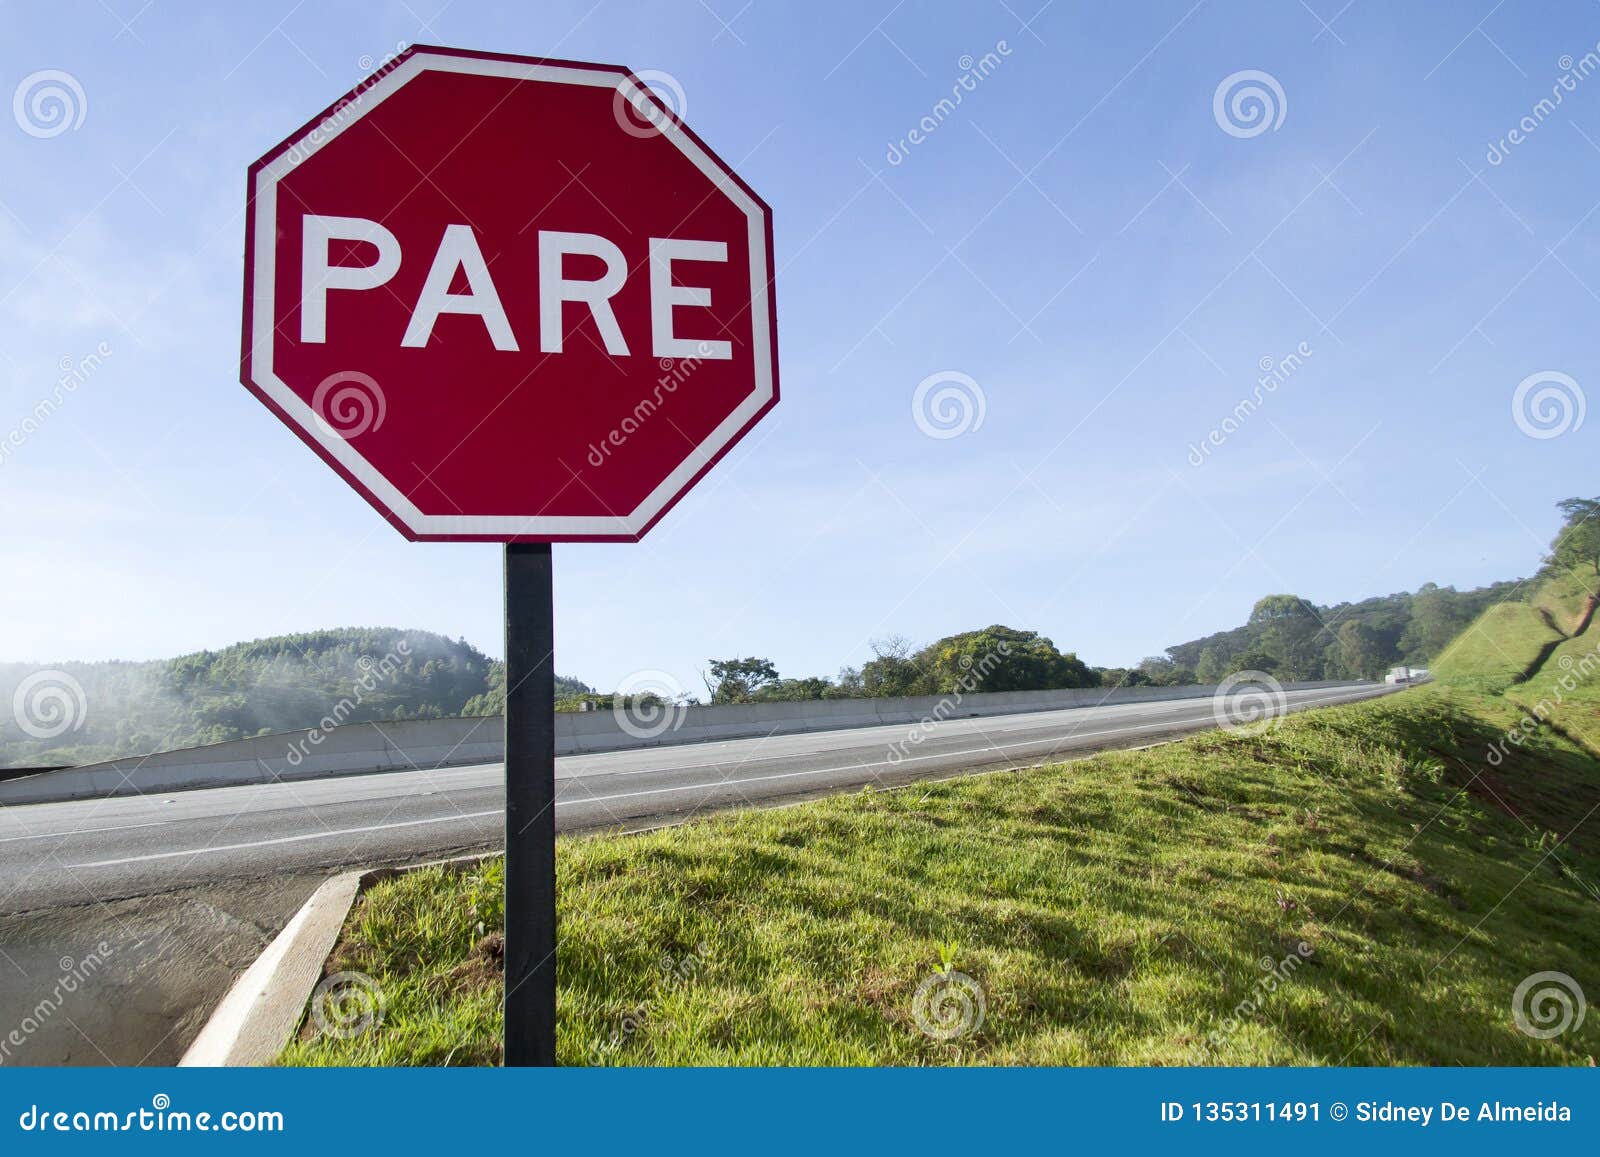 red plate stop pare transit sign